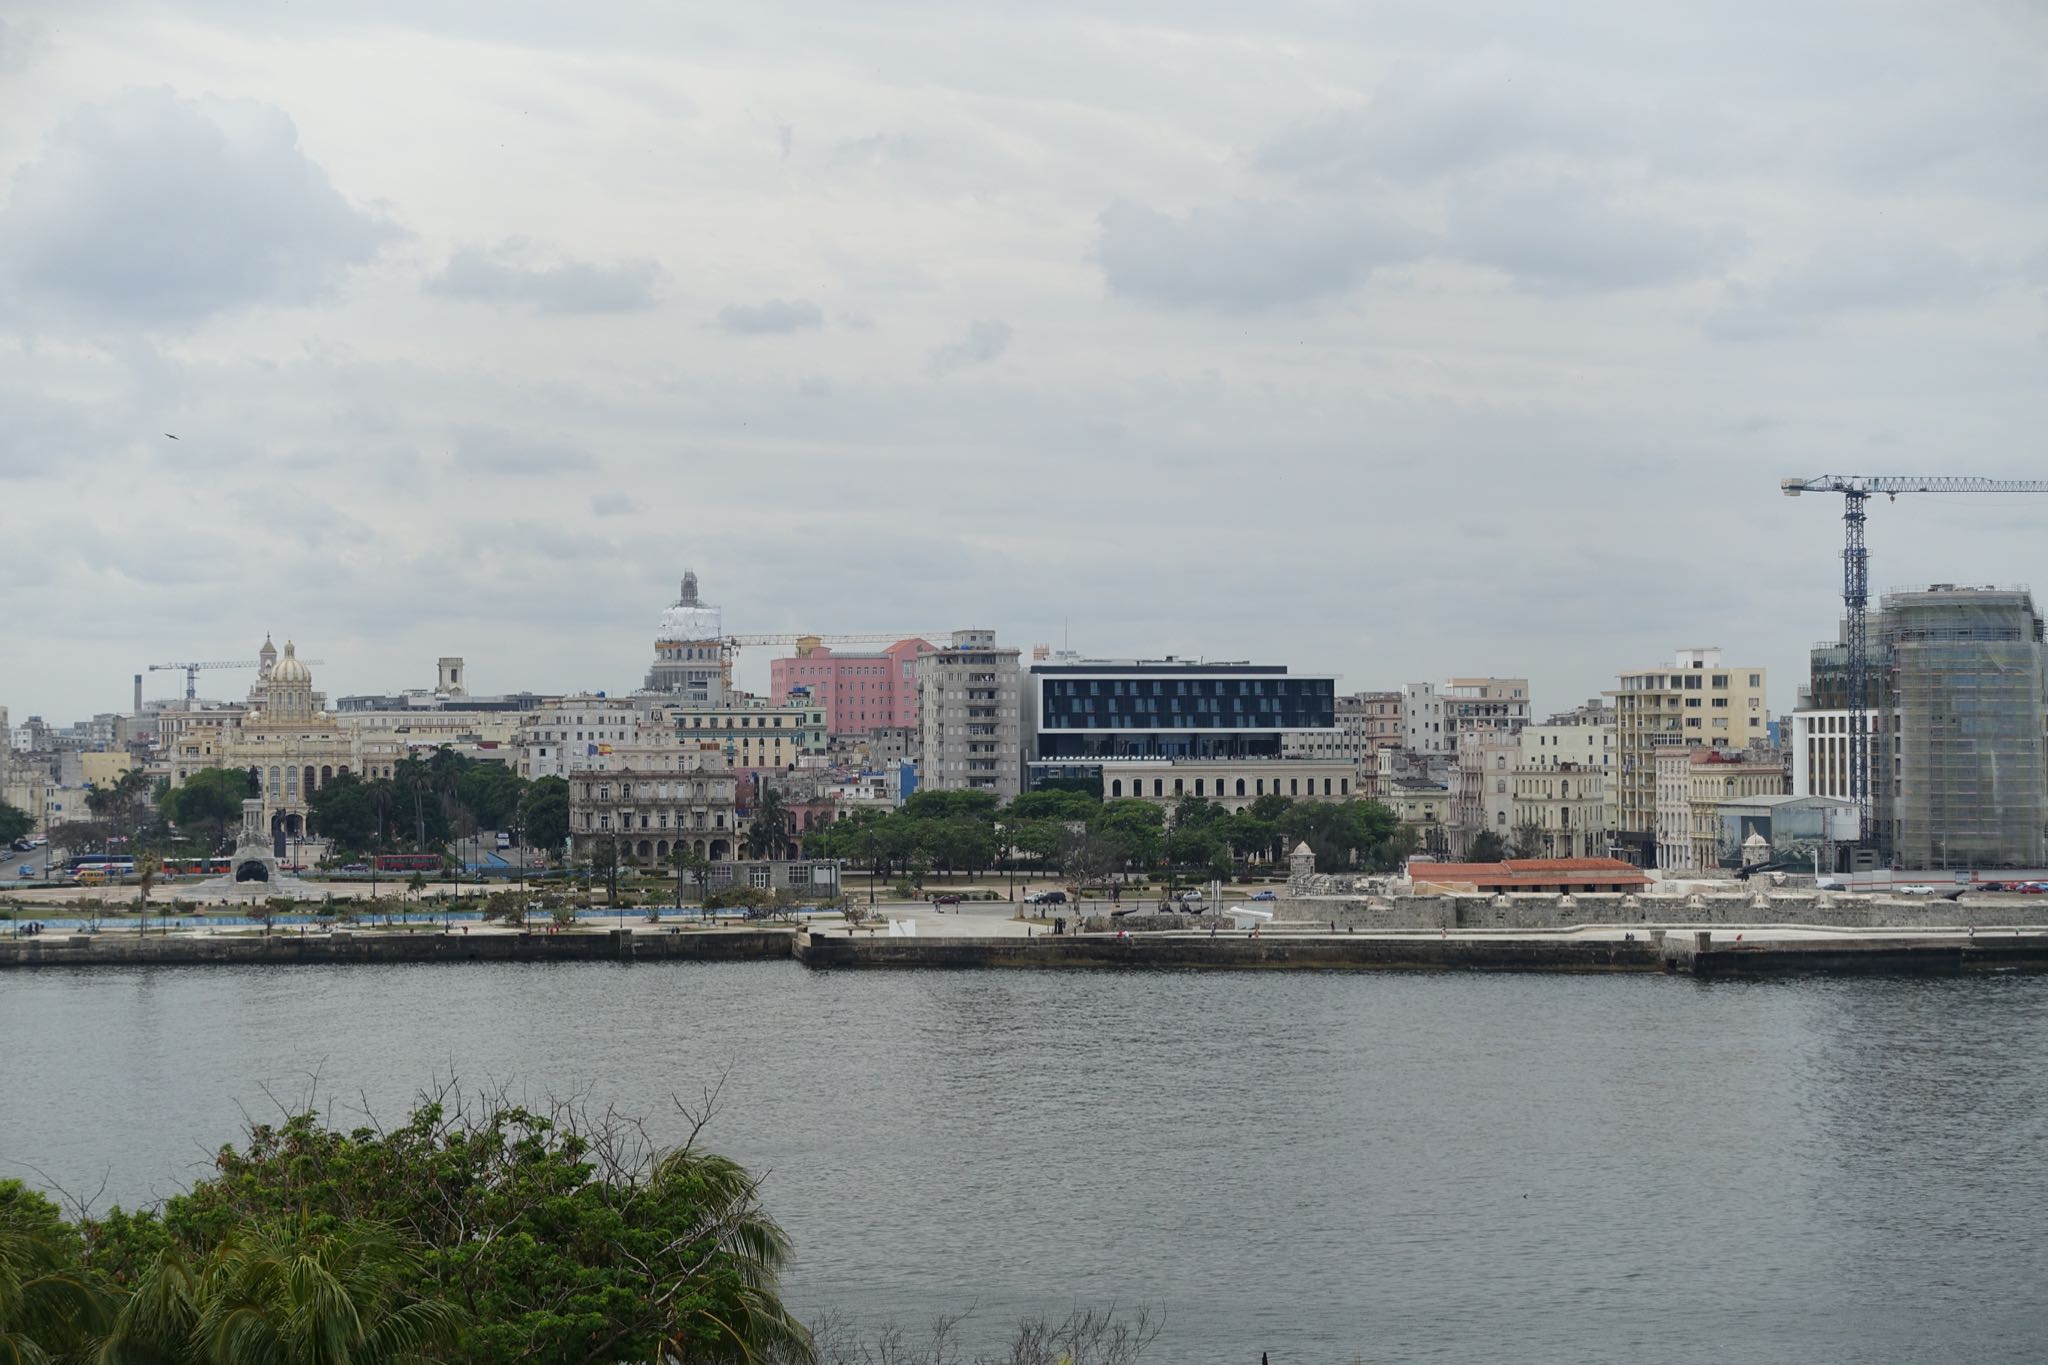 Photo 40 of 221 from the album Highlights Cuba 2019.